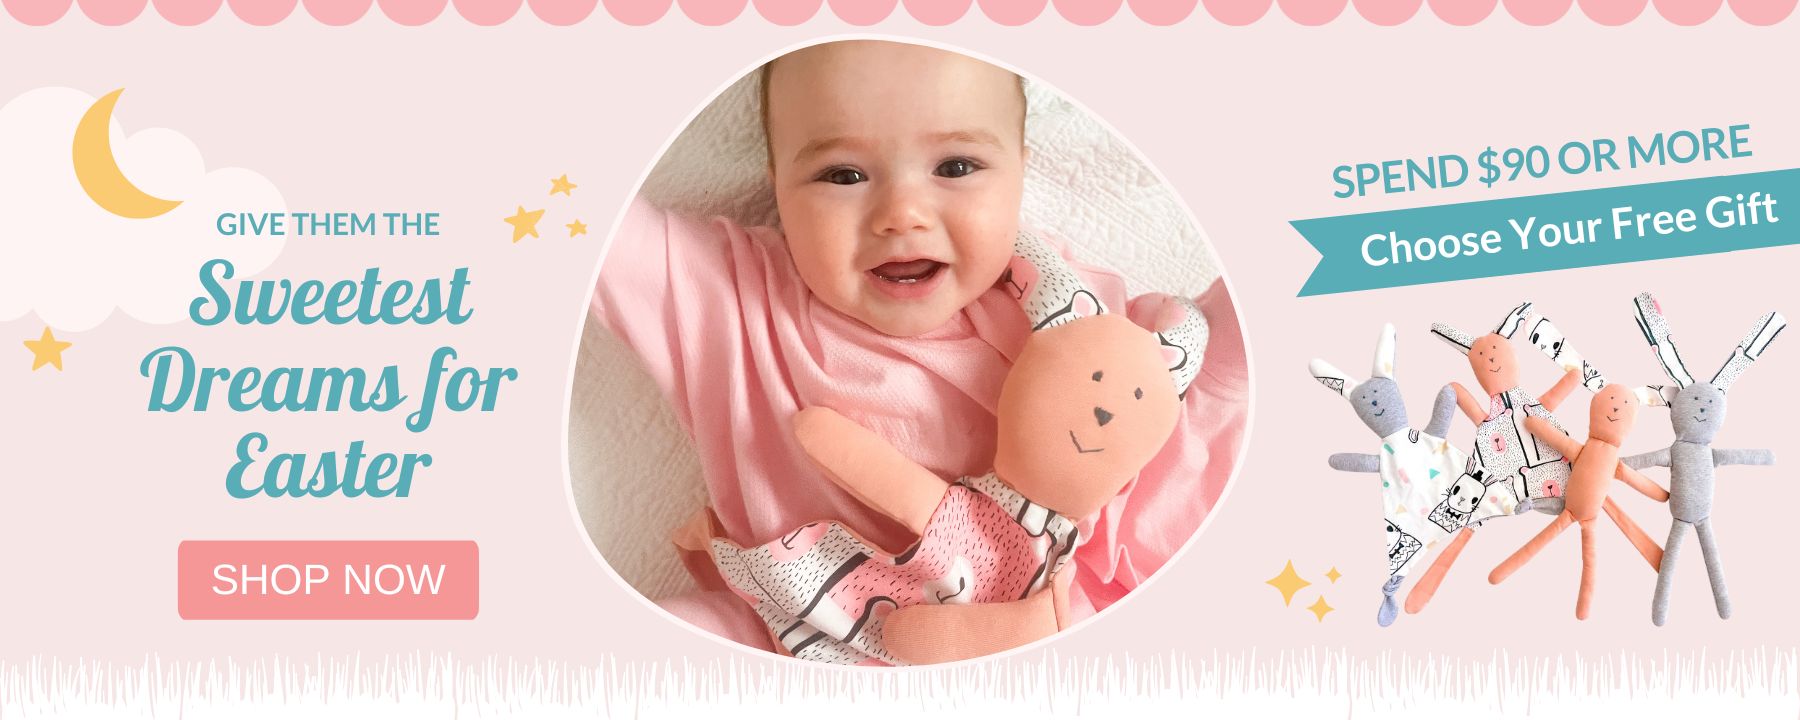 Easter Free Gift, Spend $90, Choose Bunny Hugs Doll or Blankie